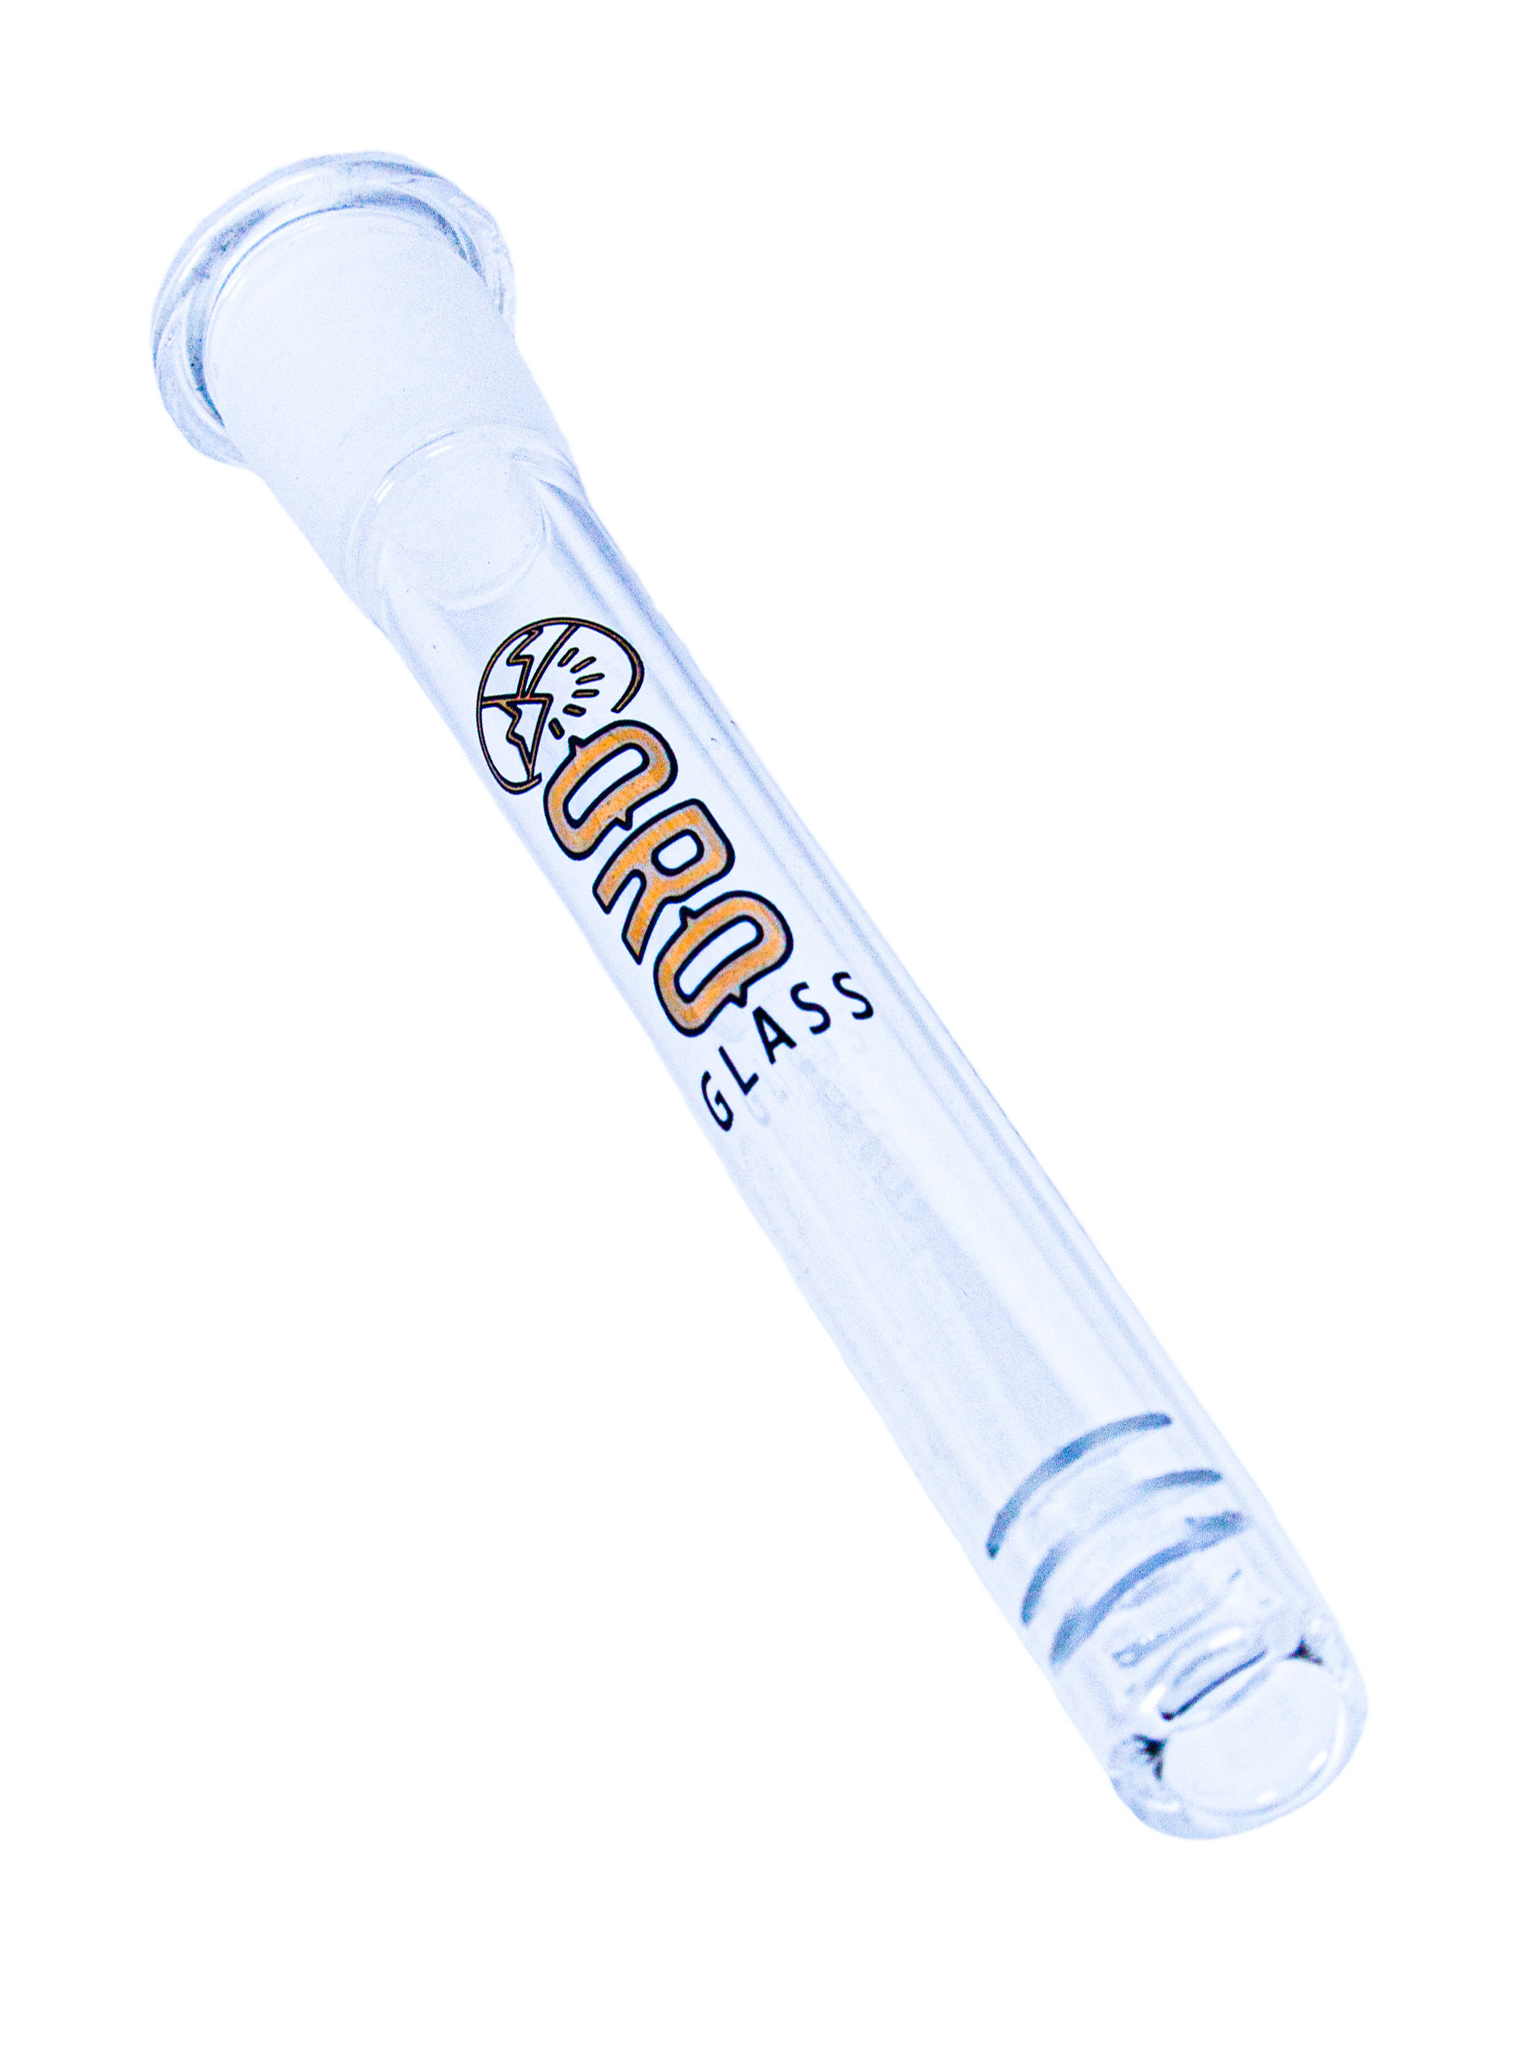 An Oro Glass Company 4.5-inch 18mm to 14mm Diffused Downstem.